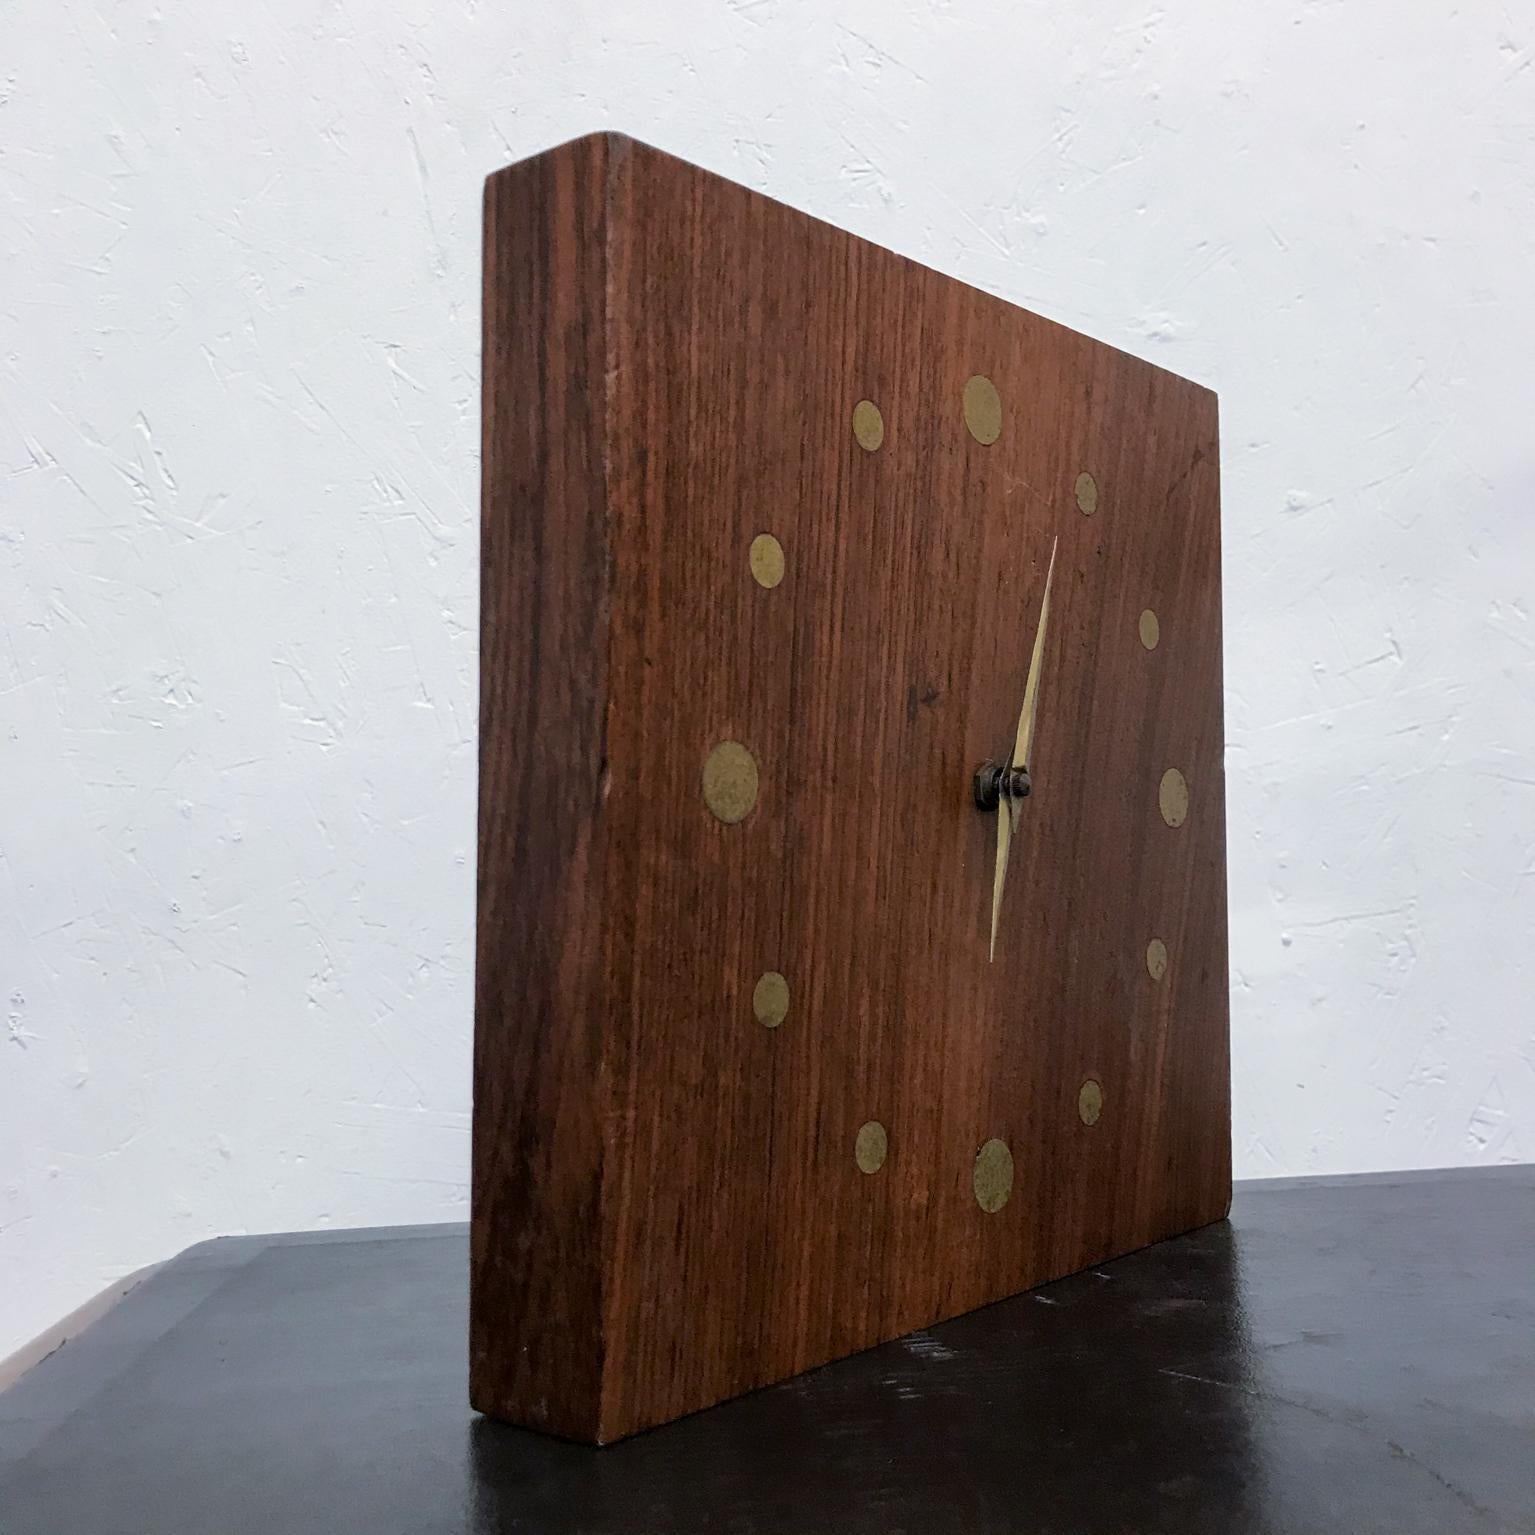 Oiled Solid Rosewood and Brass Wall Clock Mid-Century Modern Period